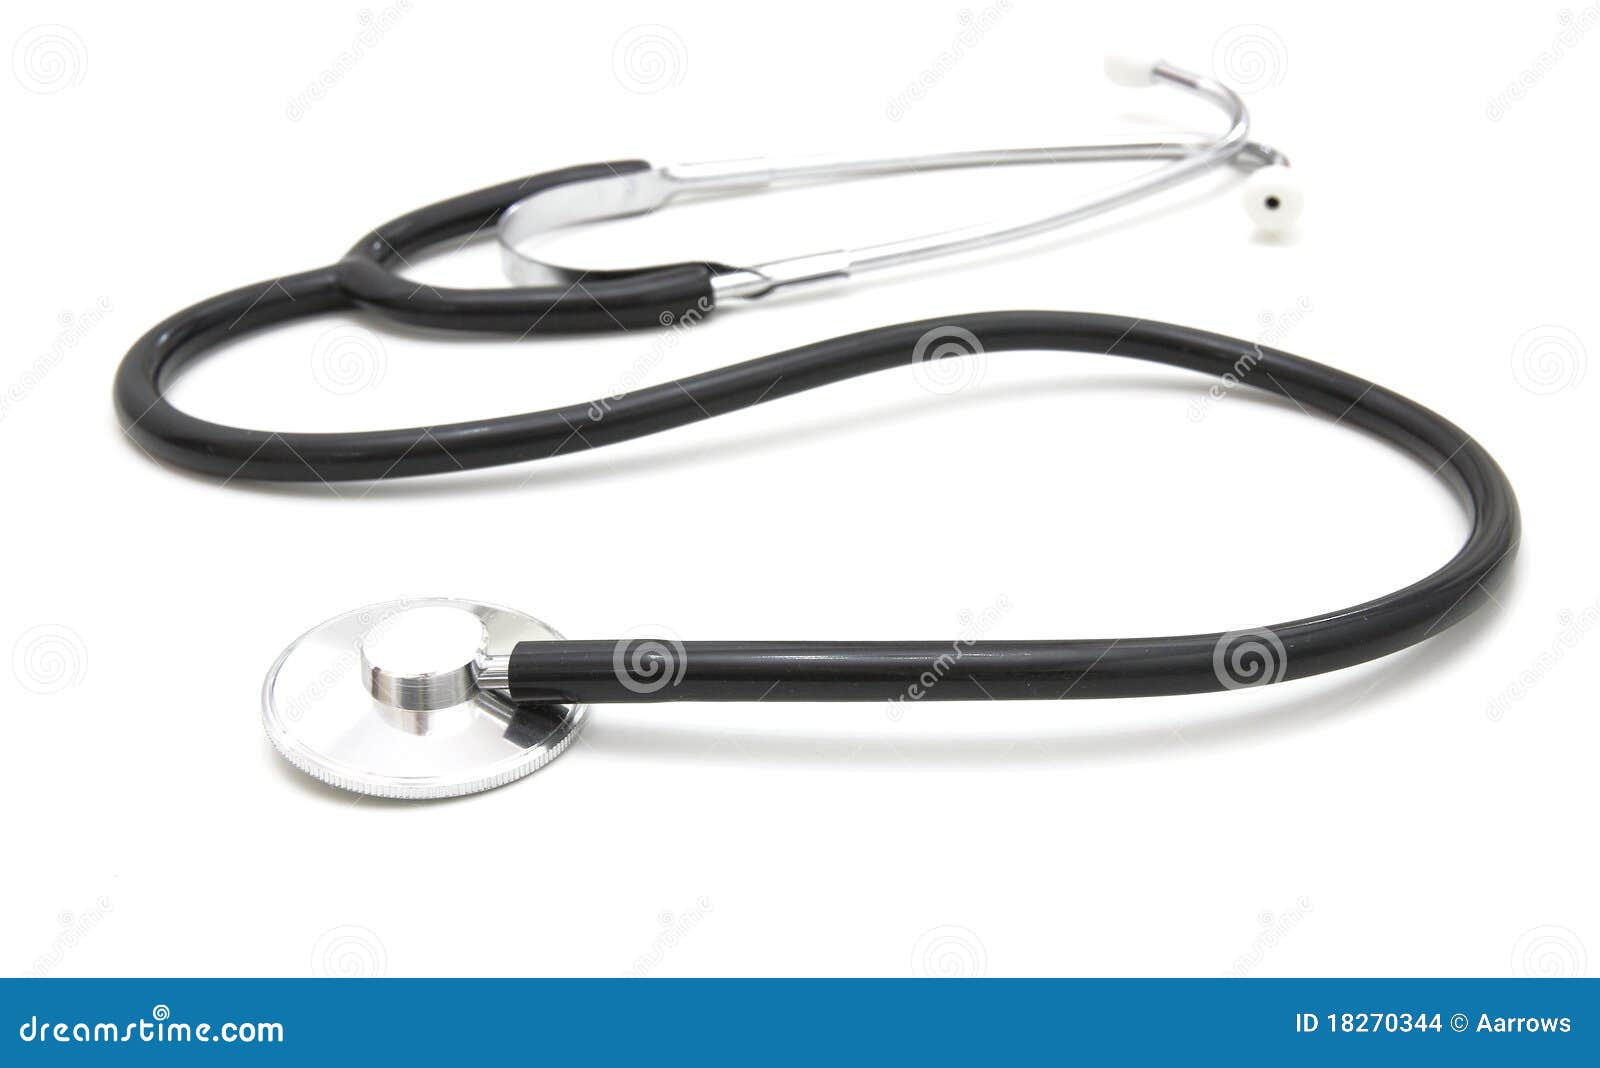 stetoskop medical equipment doctor Professional Stethoscope Can